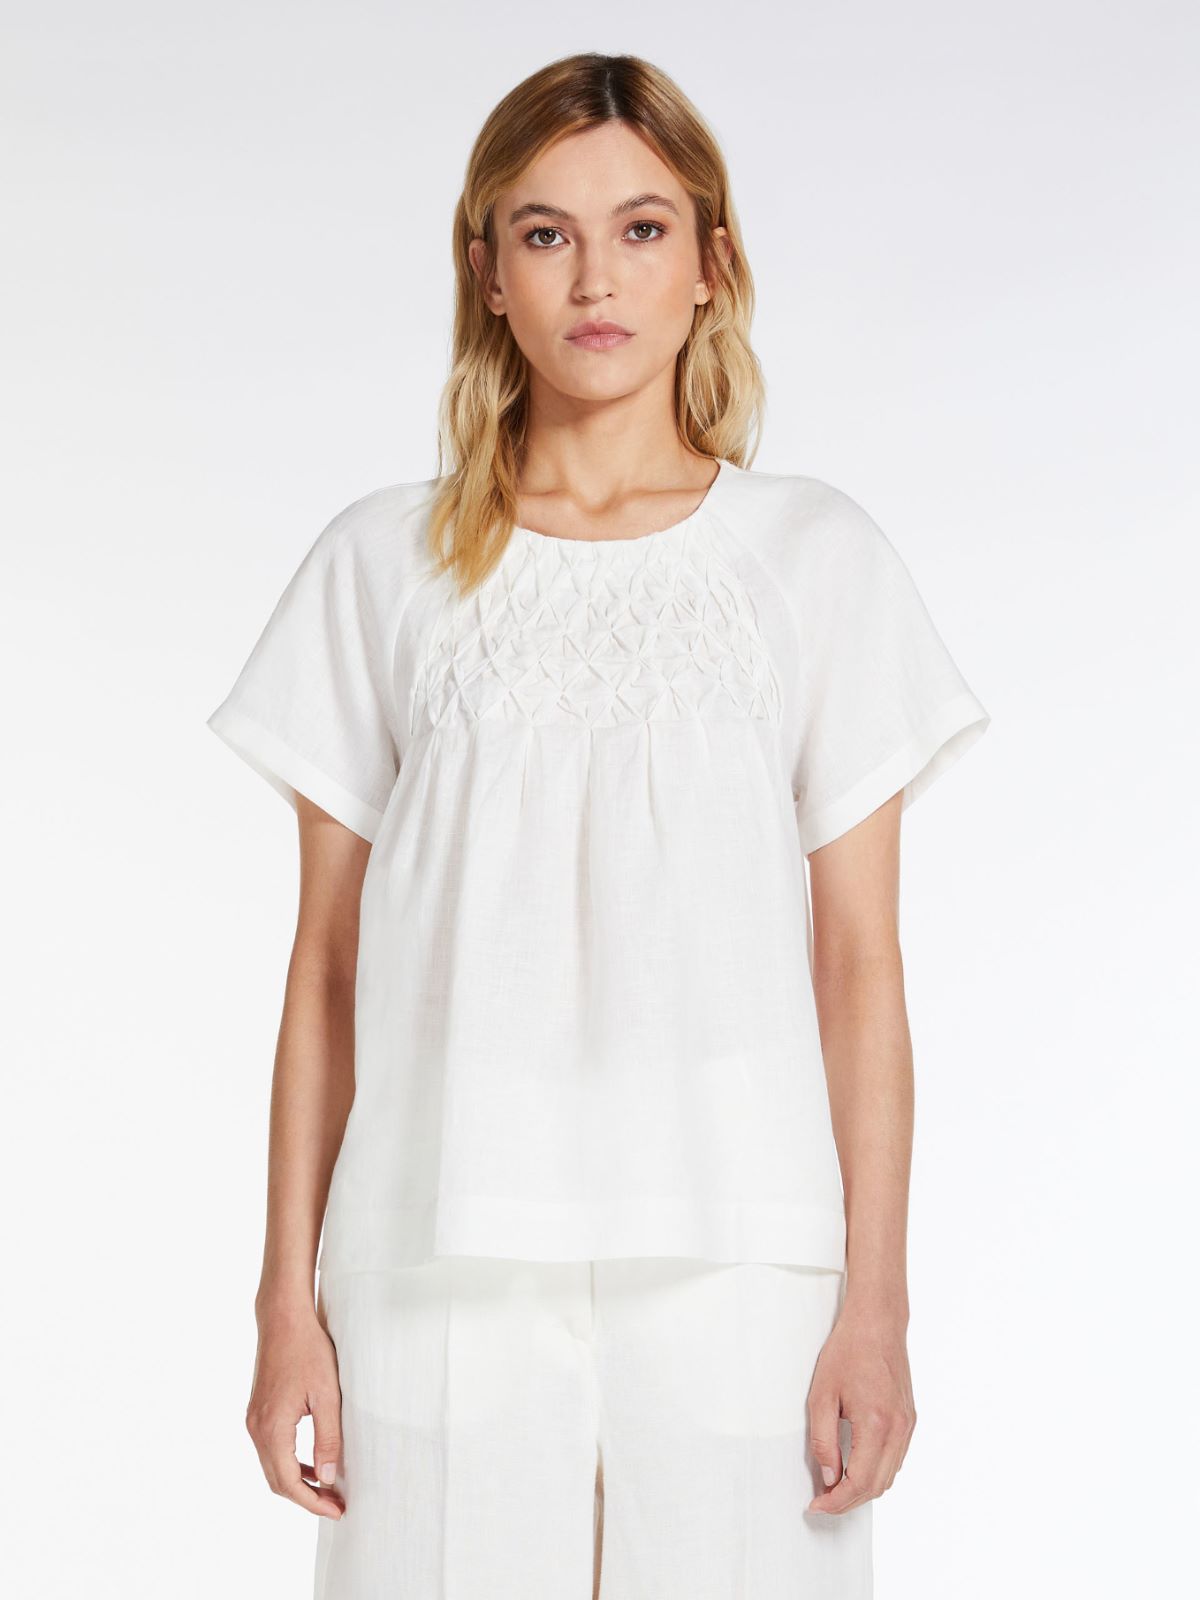 Linen and cotton blouse - WHITE - Weekend Max Mara - 2